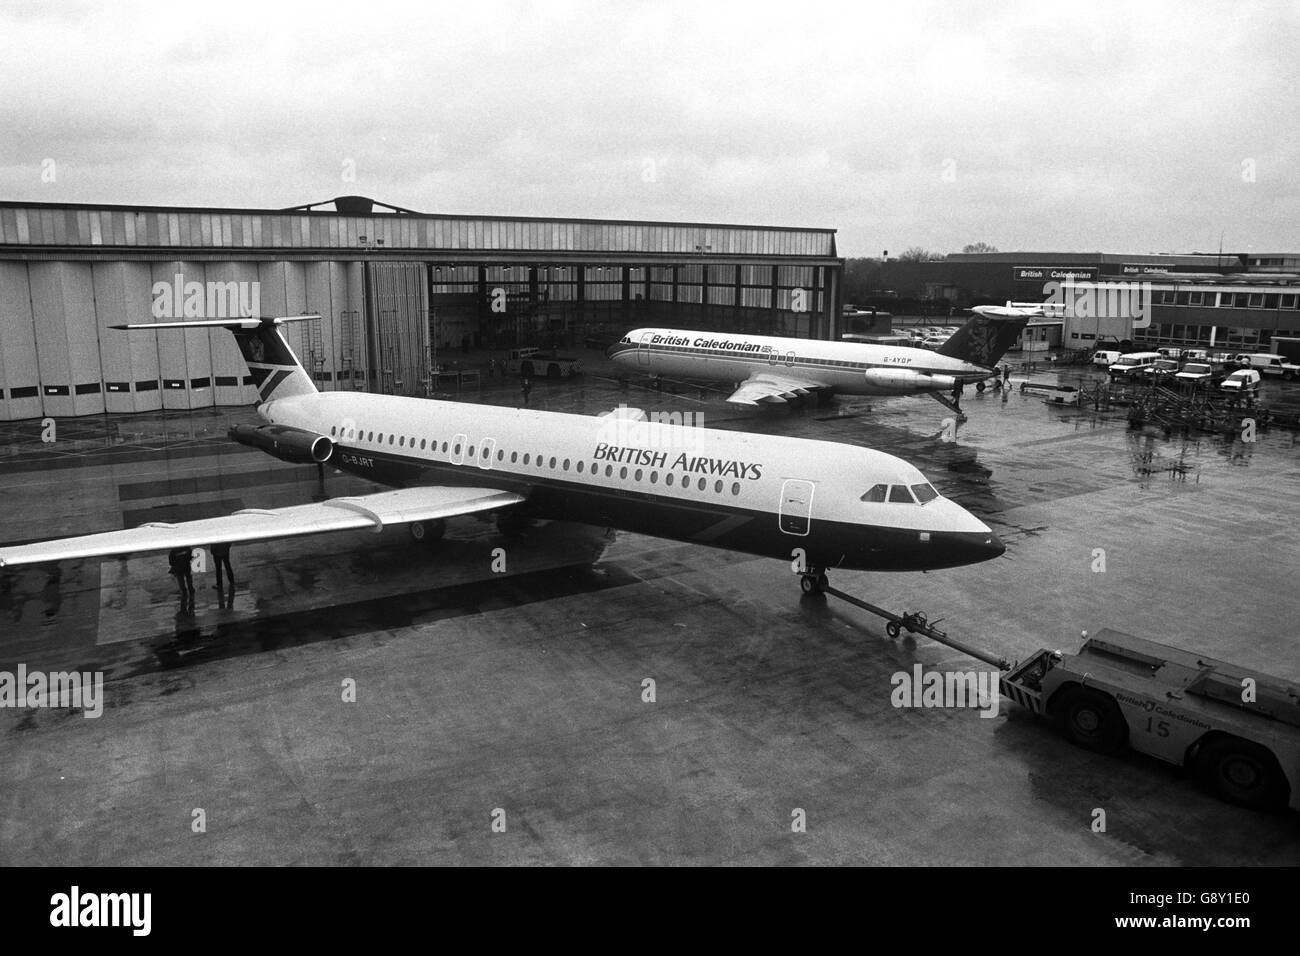 The old (in background) and new style B-Cal aircraft at Gatwick Airport, after the first of the British Caledonian's BAC 1-11 500 series of jets to be painted in the new British Airways livery. Archive-PA226398-3 Stock Photo